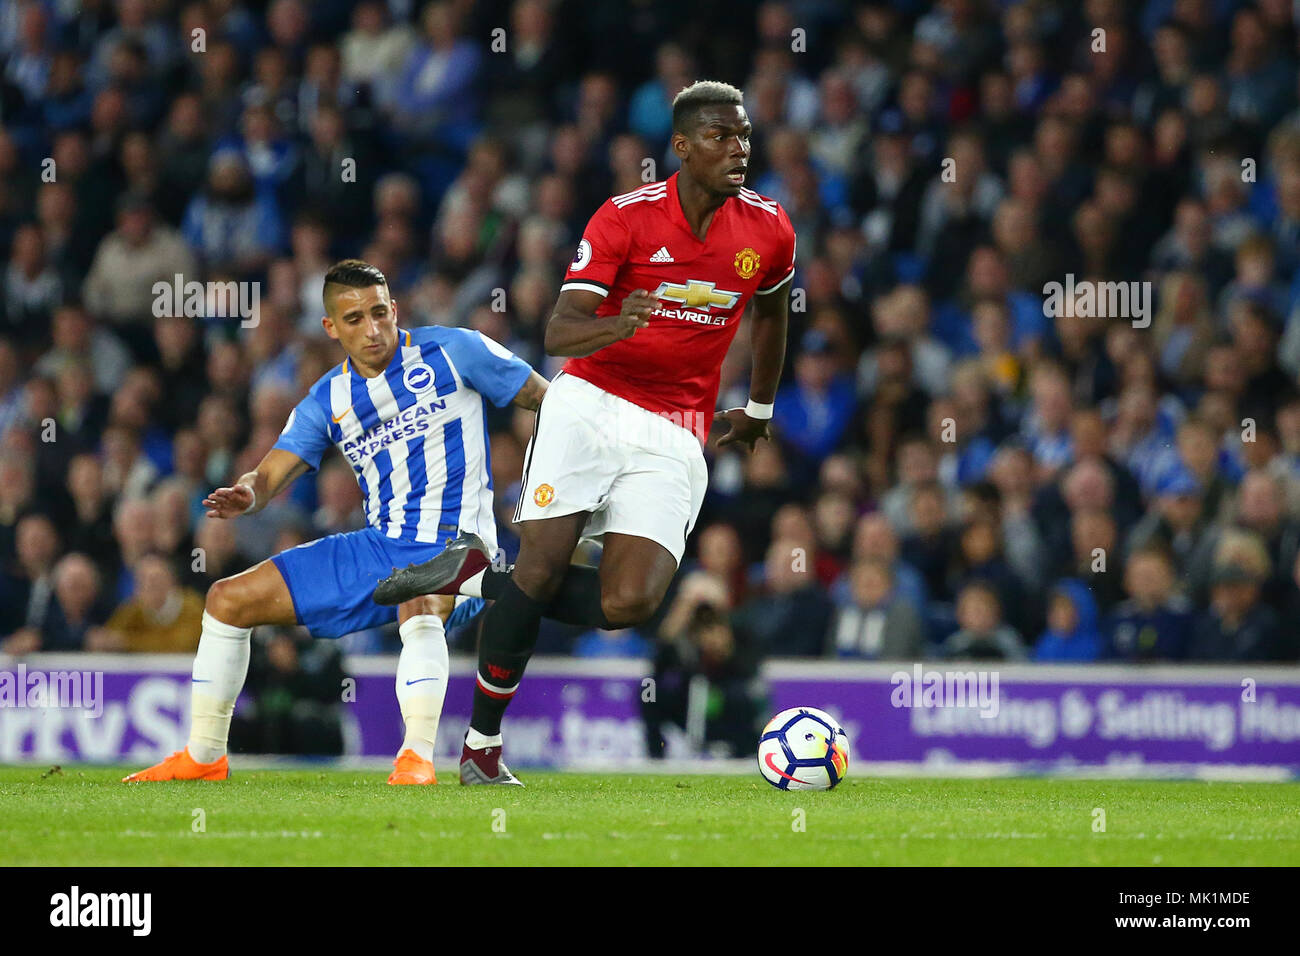 Paul Pogba of Manchester United during the Premier League match between Brighton and Hove Albion and Manchester United at the American Express Community Stadium in Brighton and Hove. 04 May 2018 *** EDITORIAL USE ONLY ***  No merchandising. For Football images FA and Premier League restrictions apply inc. no internet/mobile usage without FAPL license - for details contact Football Dataco Stock Photo